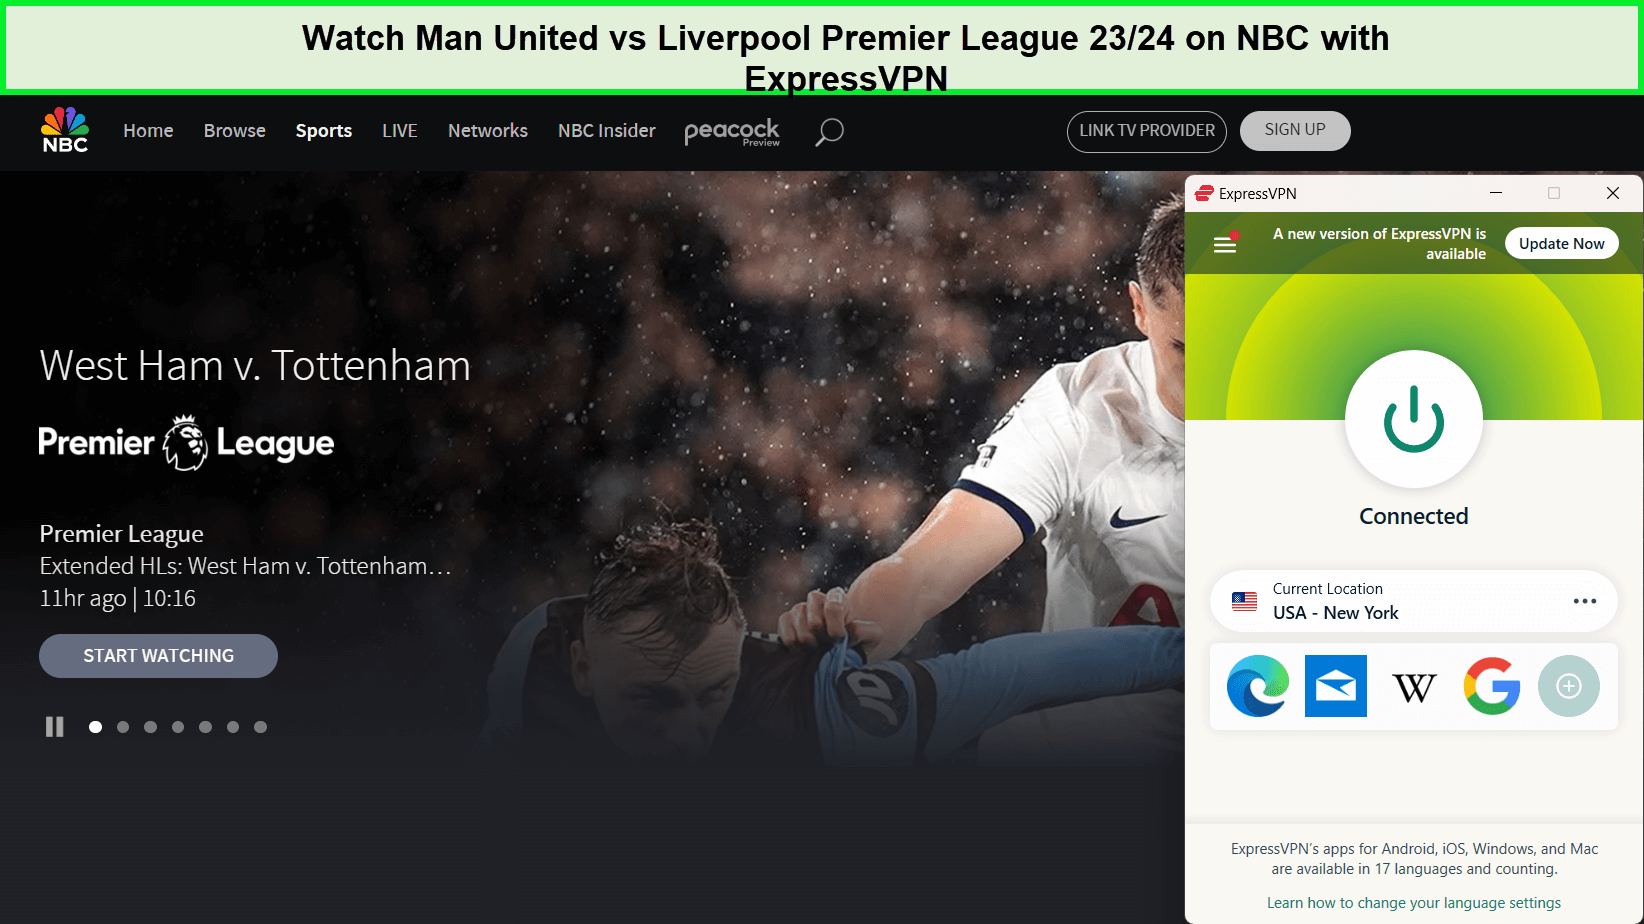 Watch-Man-United-vs-Liverpool-Premier-League-23-24-in-Germany-on-NBC